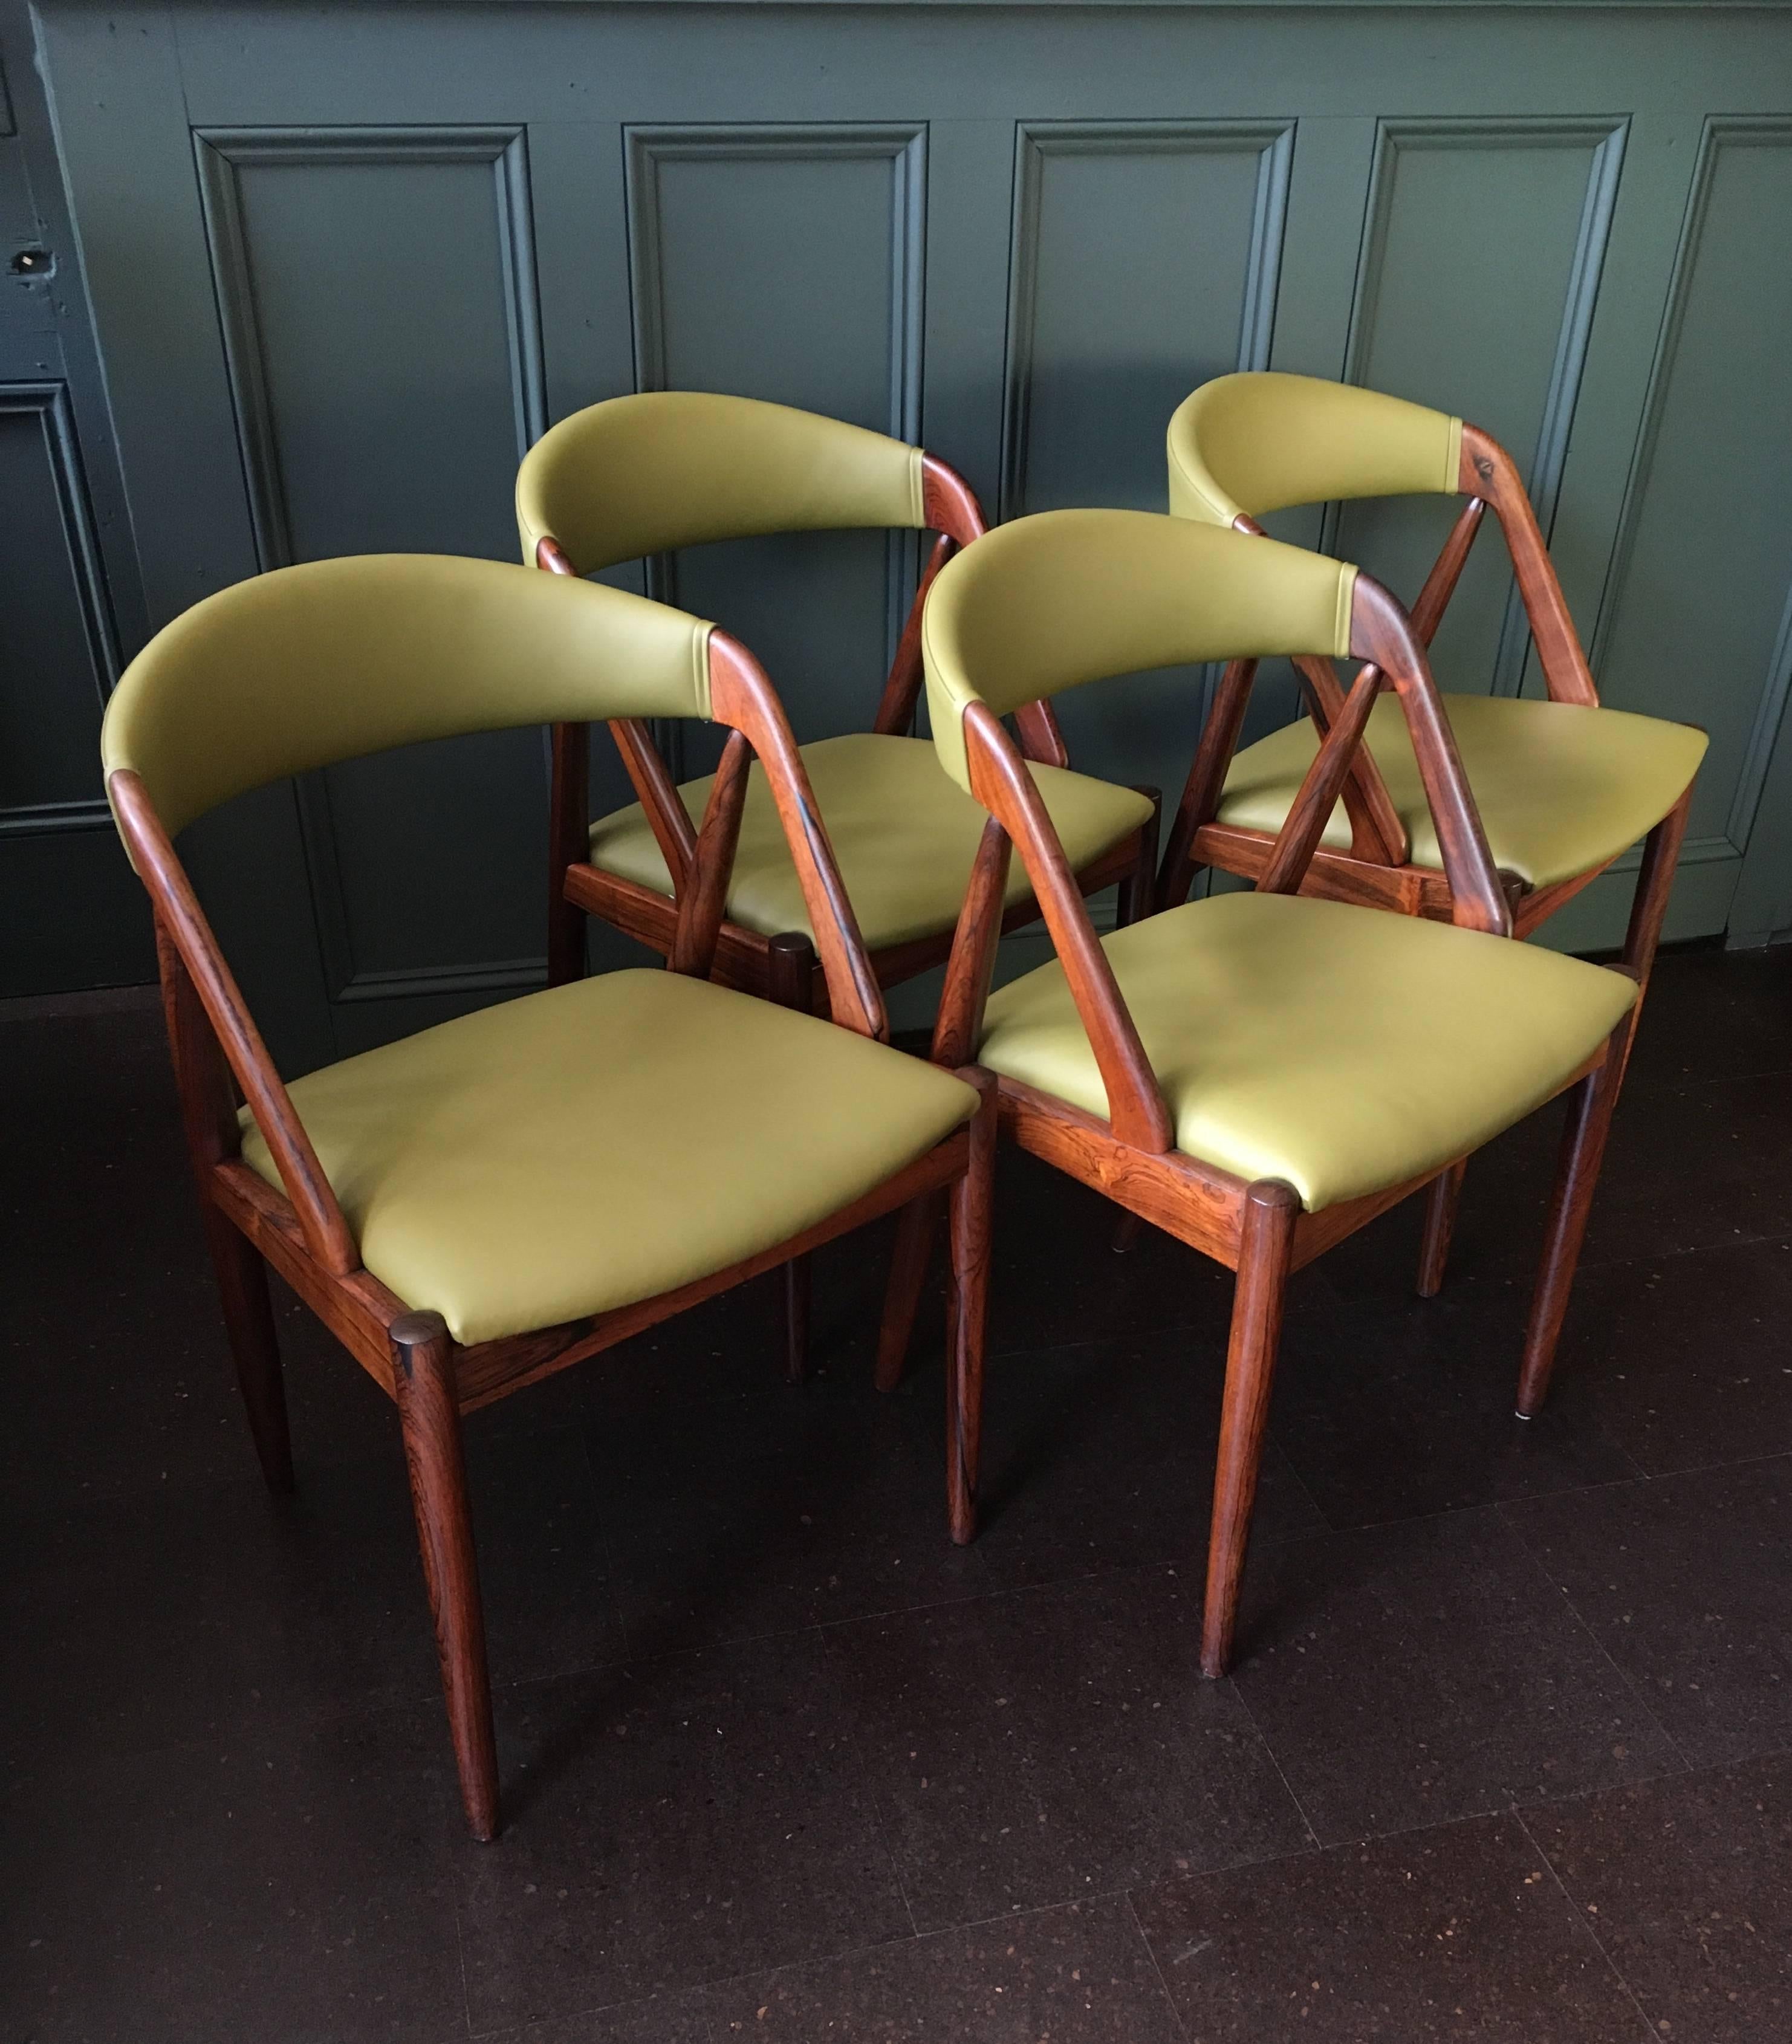 Fully refurbished and re-upholstered Kai Kristiansen model 31 dining chairs, Denmark, 1960. 
Wonderful new olive Italian leather to contrast the Santos rosewood frames. Rare examples. 
We have more in stock. 
Custom upholstery is available.
Please